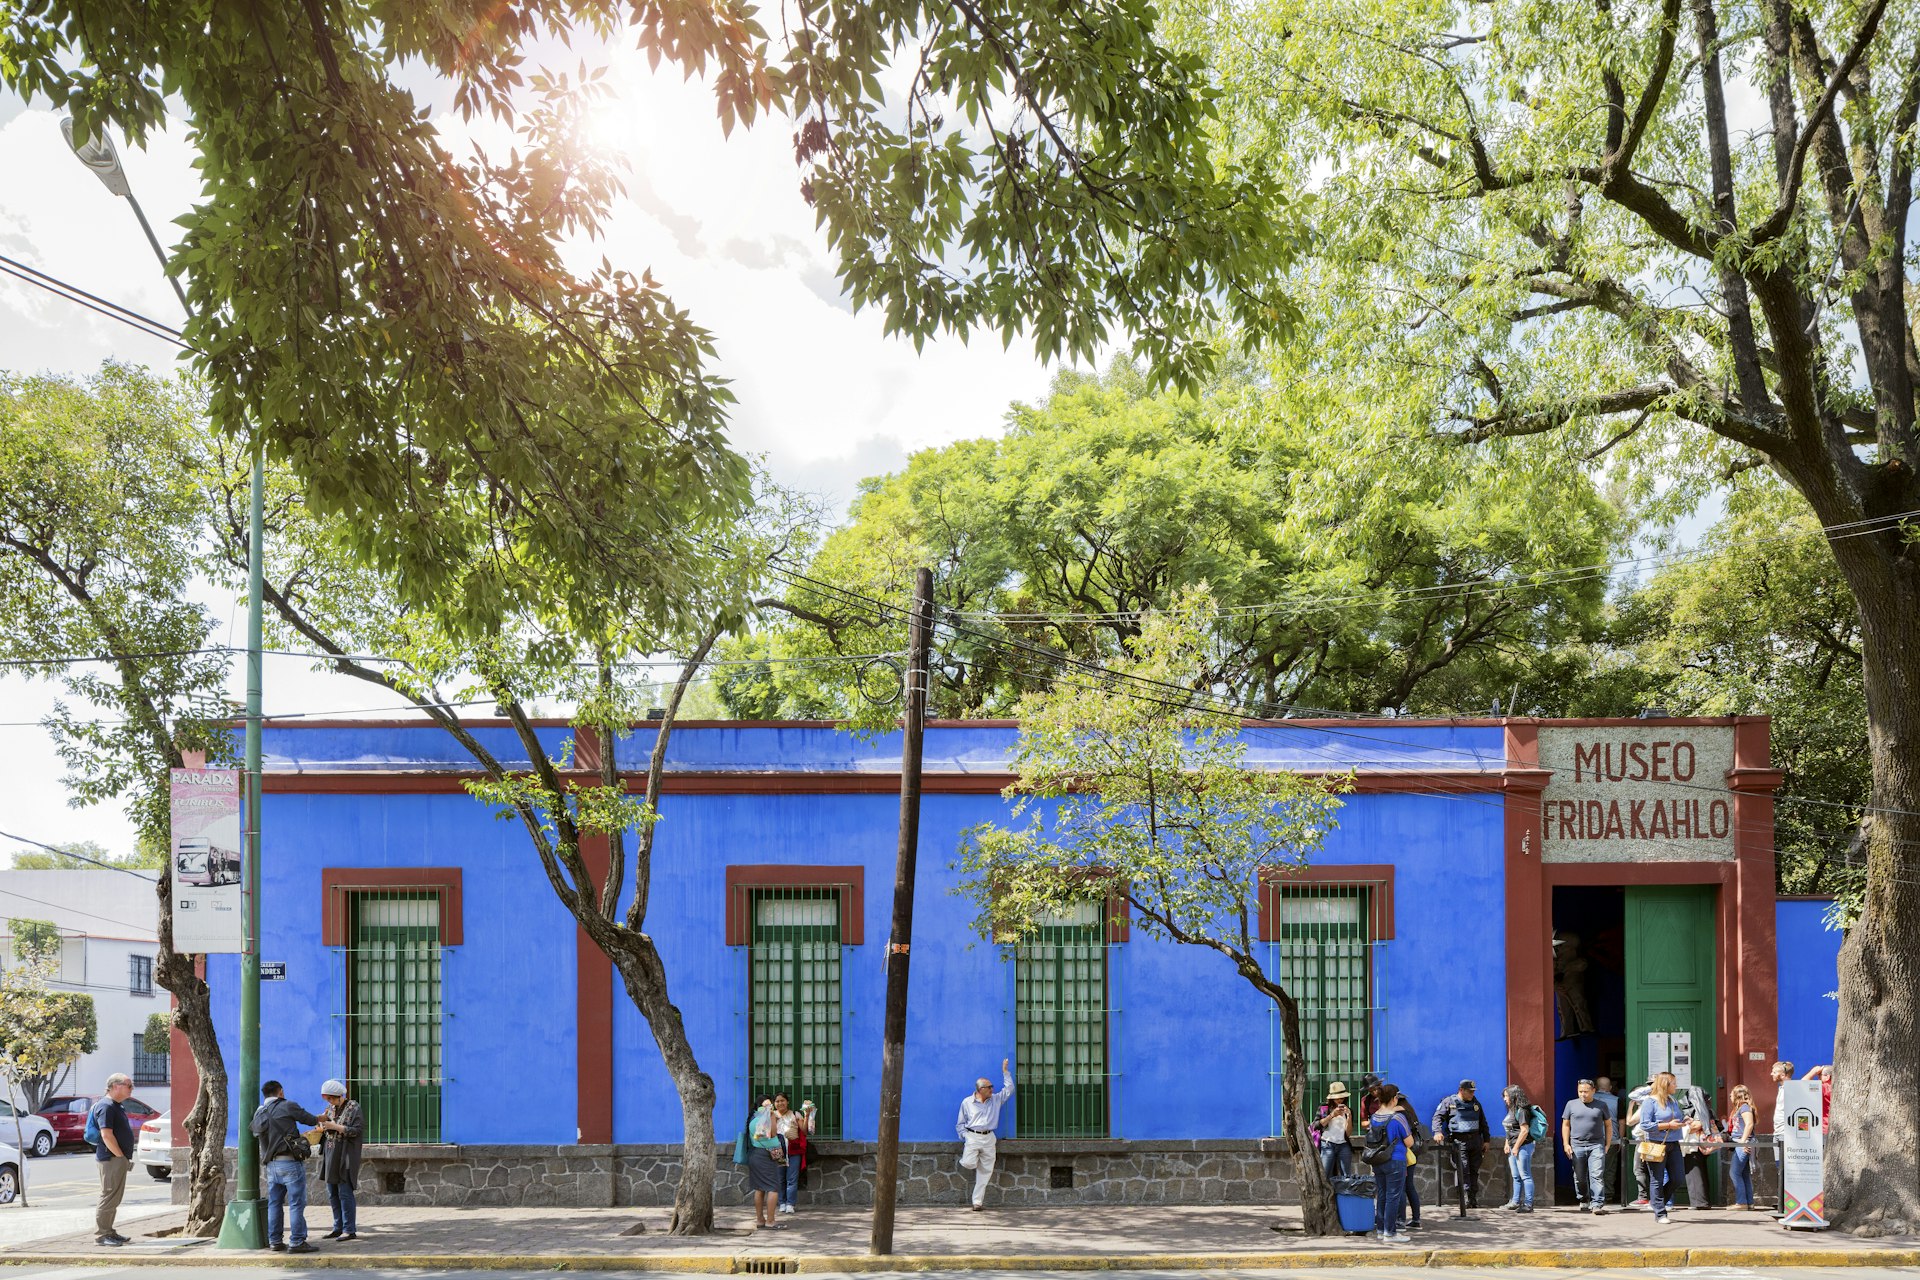 People outside of the Blue House (La Casa Azul), a historic house and art museum dedicated to the life and work of Mexican artist Frida Kahlo